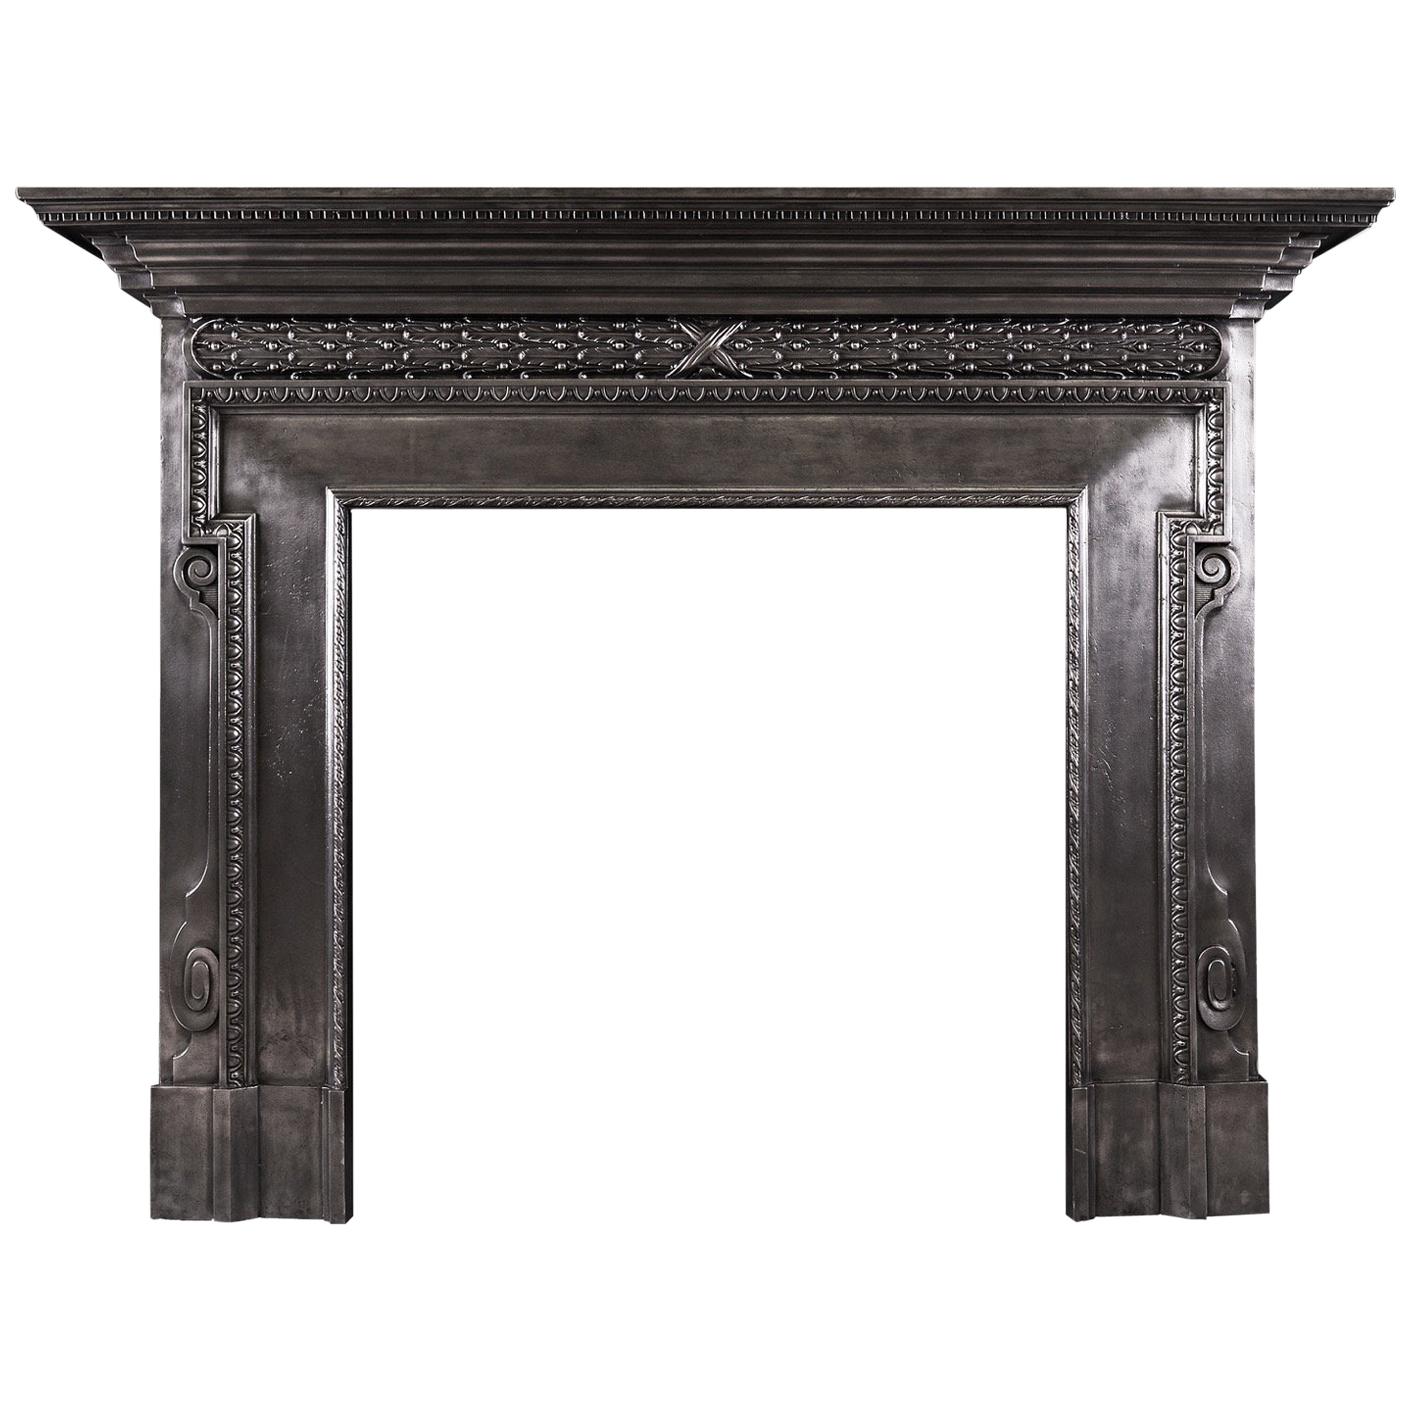 Polished Cast Iron Fireplace in the Mid Georgian Style